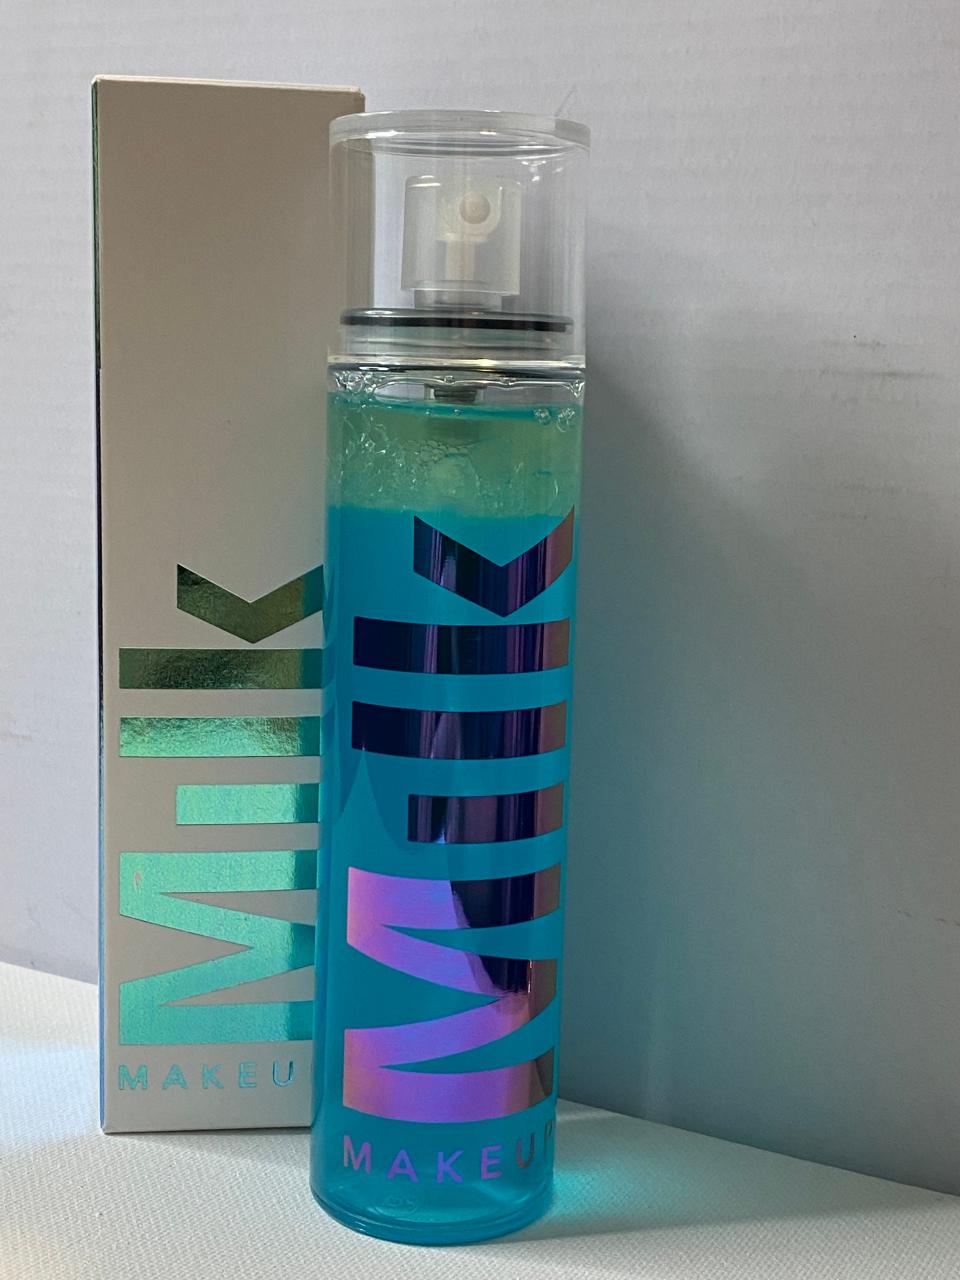 A blue spray bottle of with iridescent &quot;Milk&quot; text on side with a box with similar iridescent text to left of spray